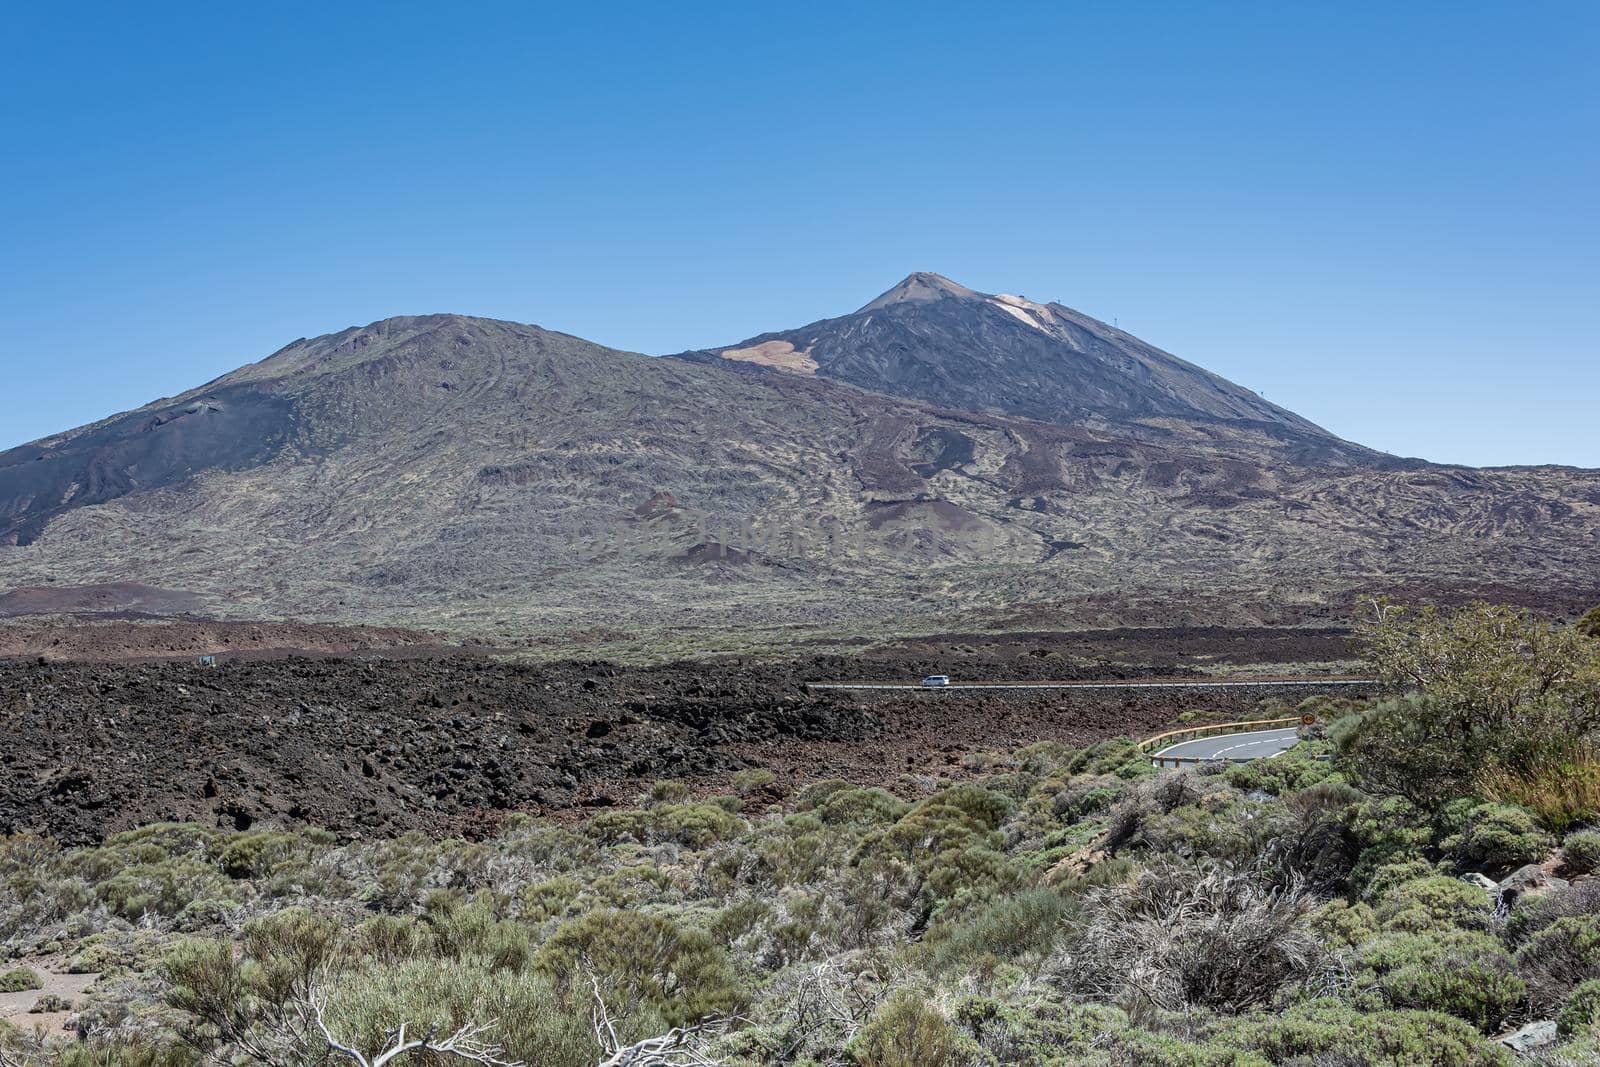 Mountain landscape. Foothills of the Teide volcano (Tenerife, Spain)